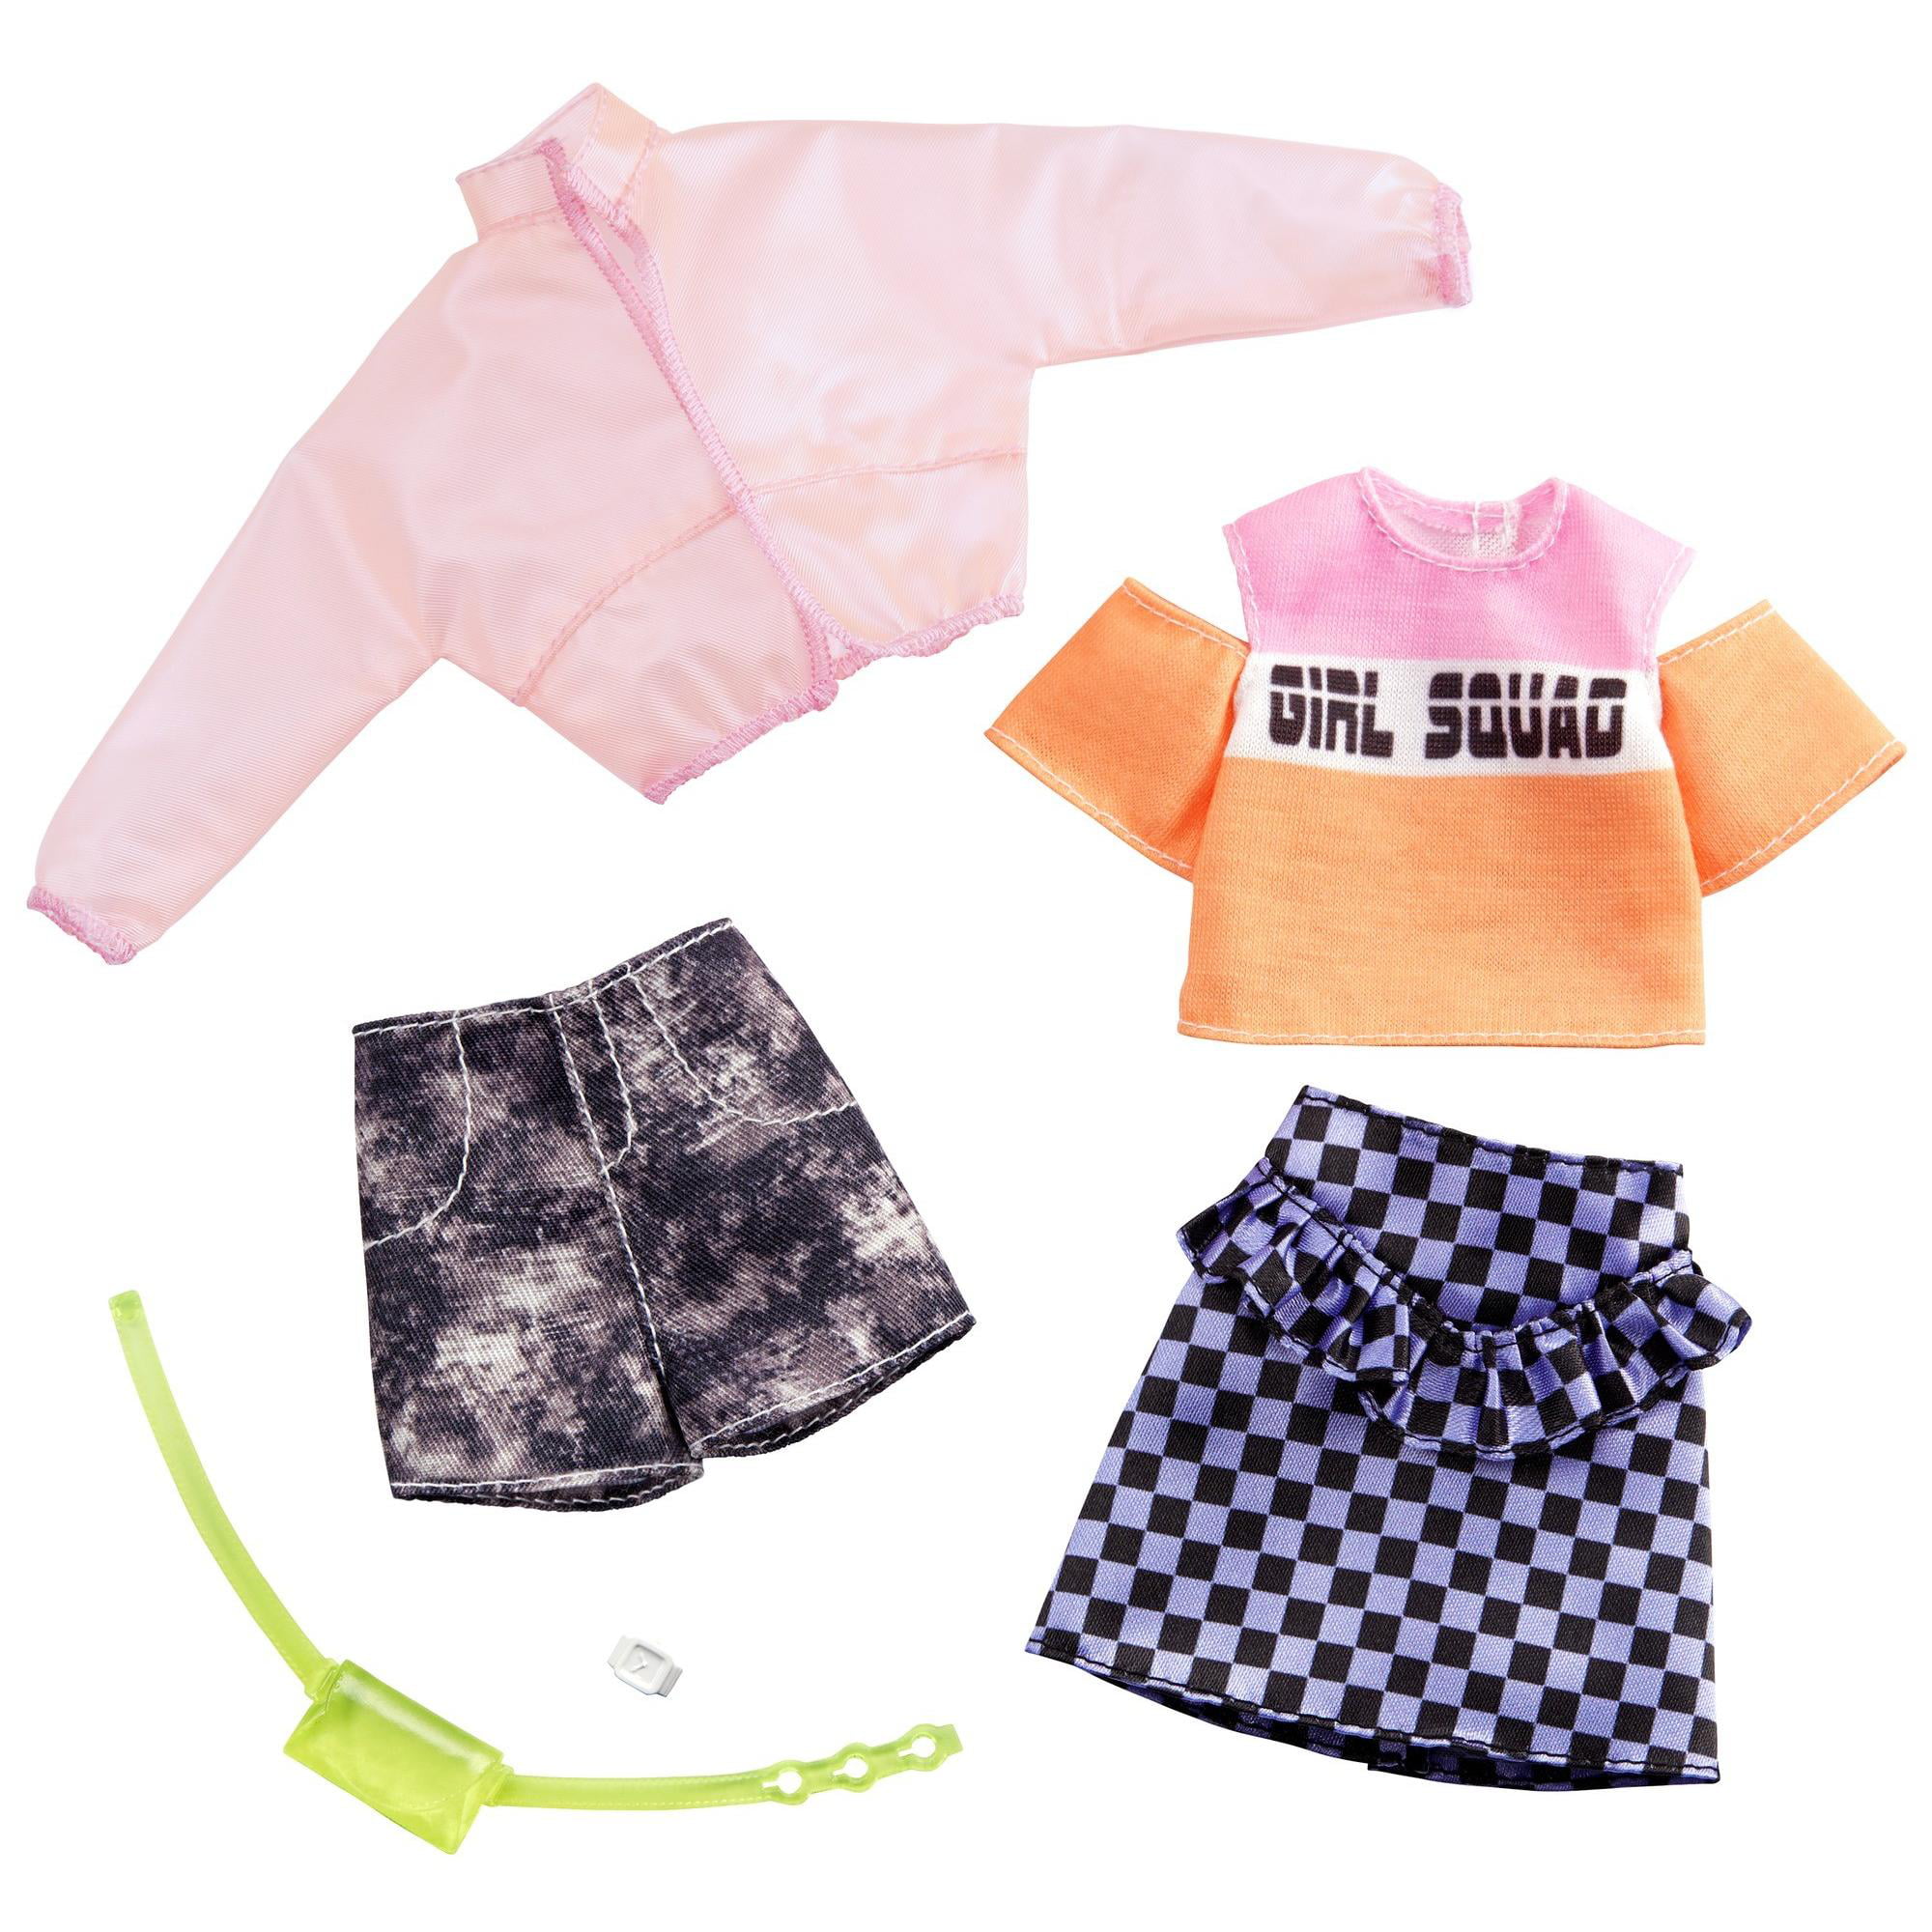 Barbie Clothes 2 Outfits And 2 Accessories For Barbie Doll